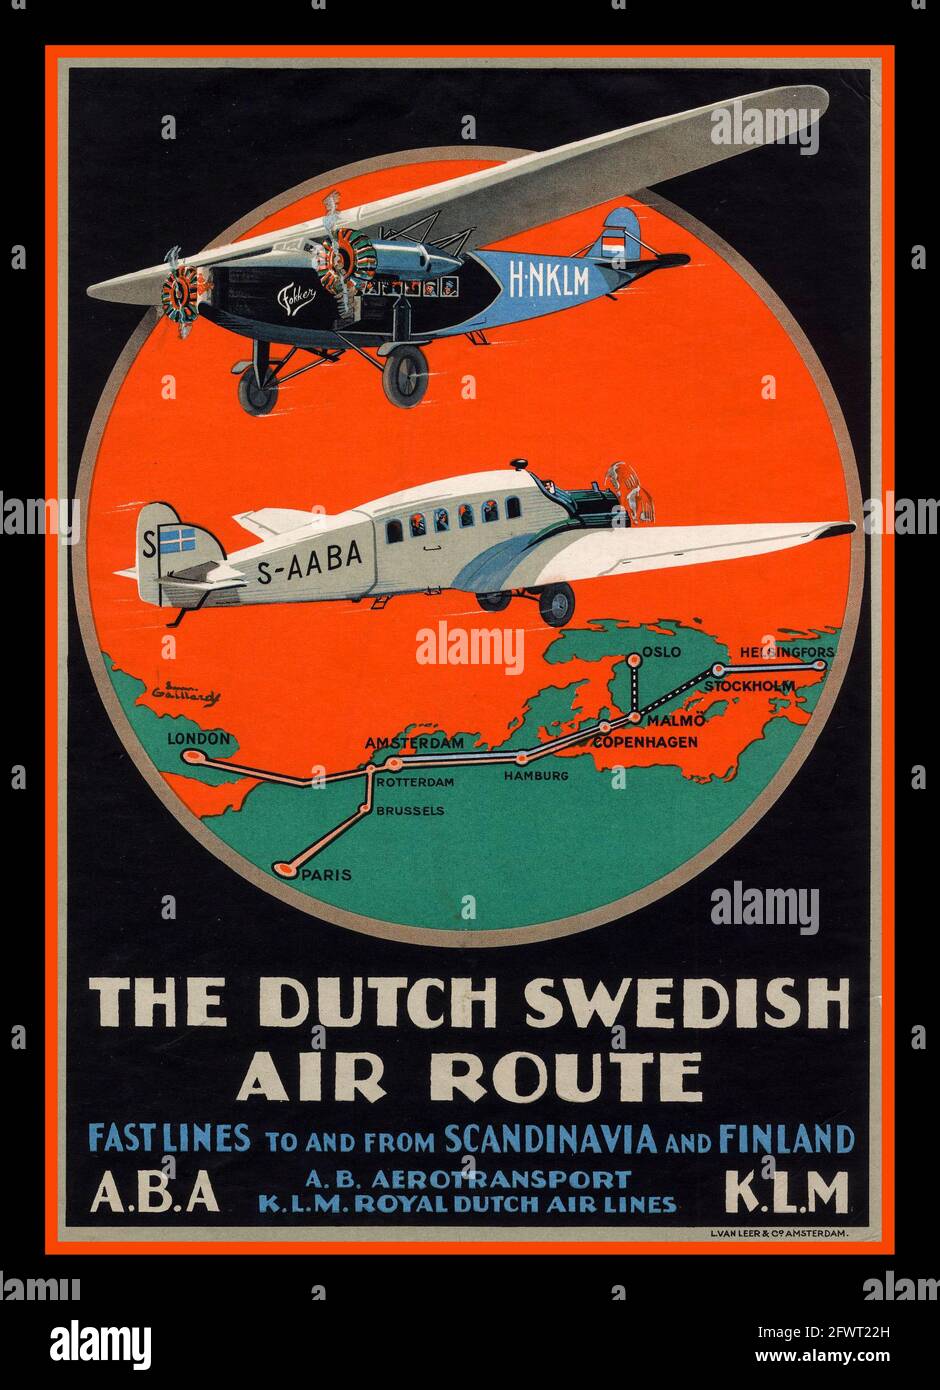 Vintage 1930's poster air travel to and from Scandinavia and Finland 1930 THE DUTCH SWEDISH AIR ROUTE. FASTLINES TO AND FROM SCANDINAVIA AND FINLAND. A.B.A & K.L.M Stock Photo